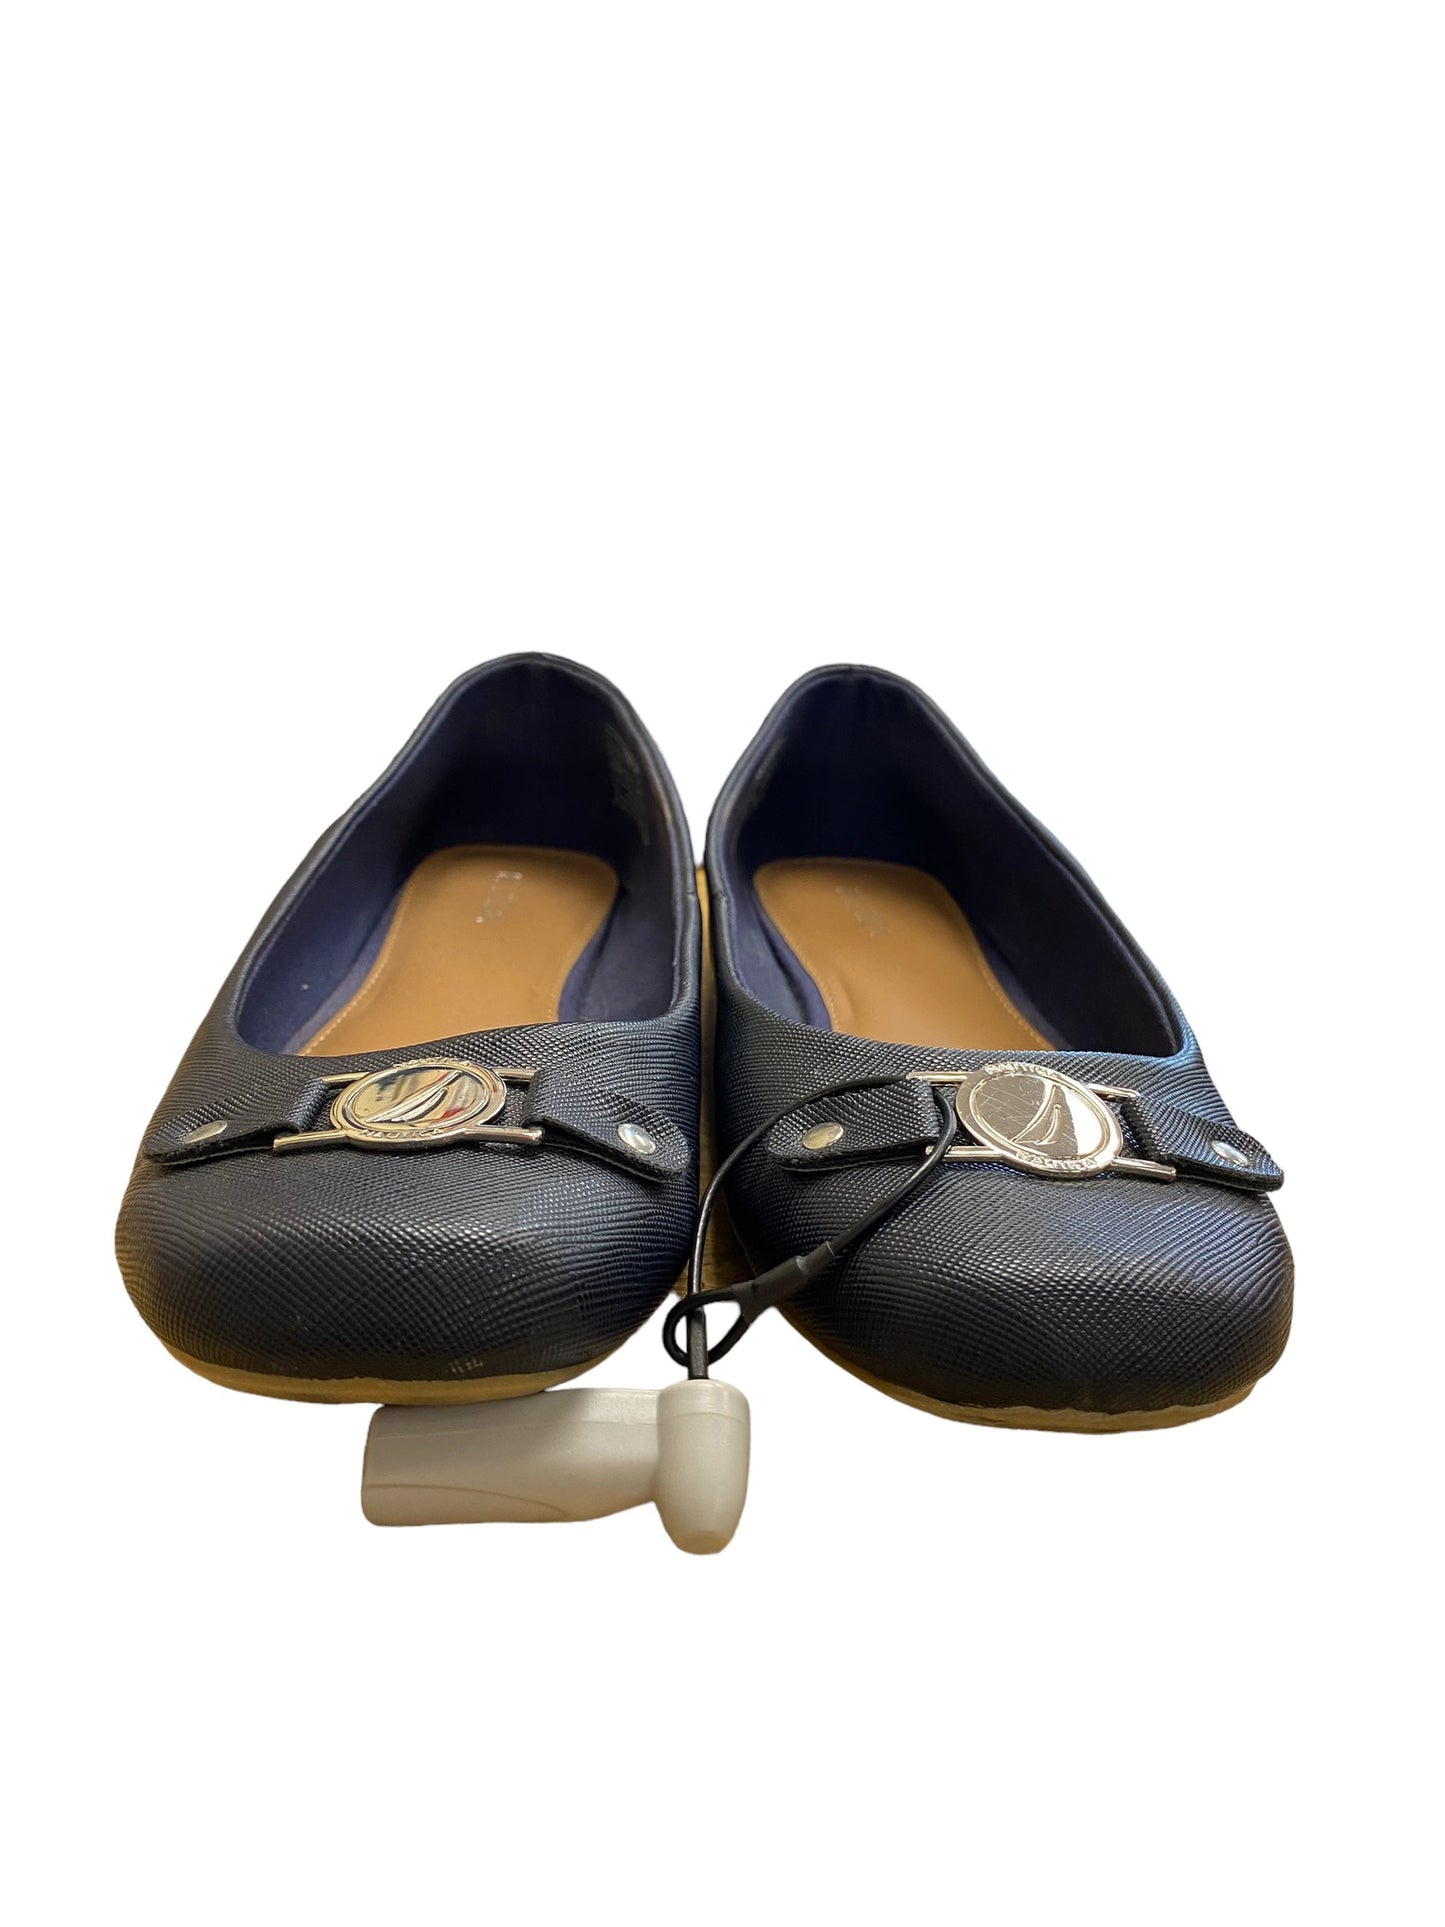 Shoes Flats Ballet By Nautica  Size: 8.5